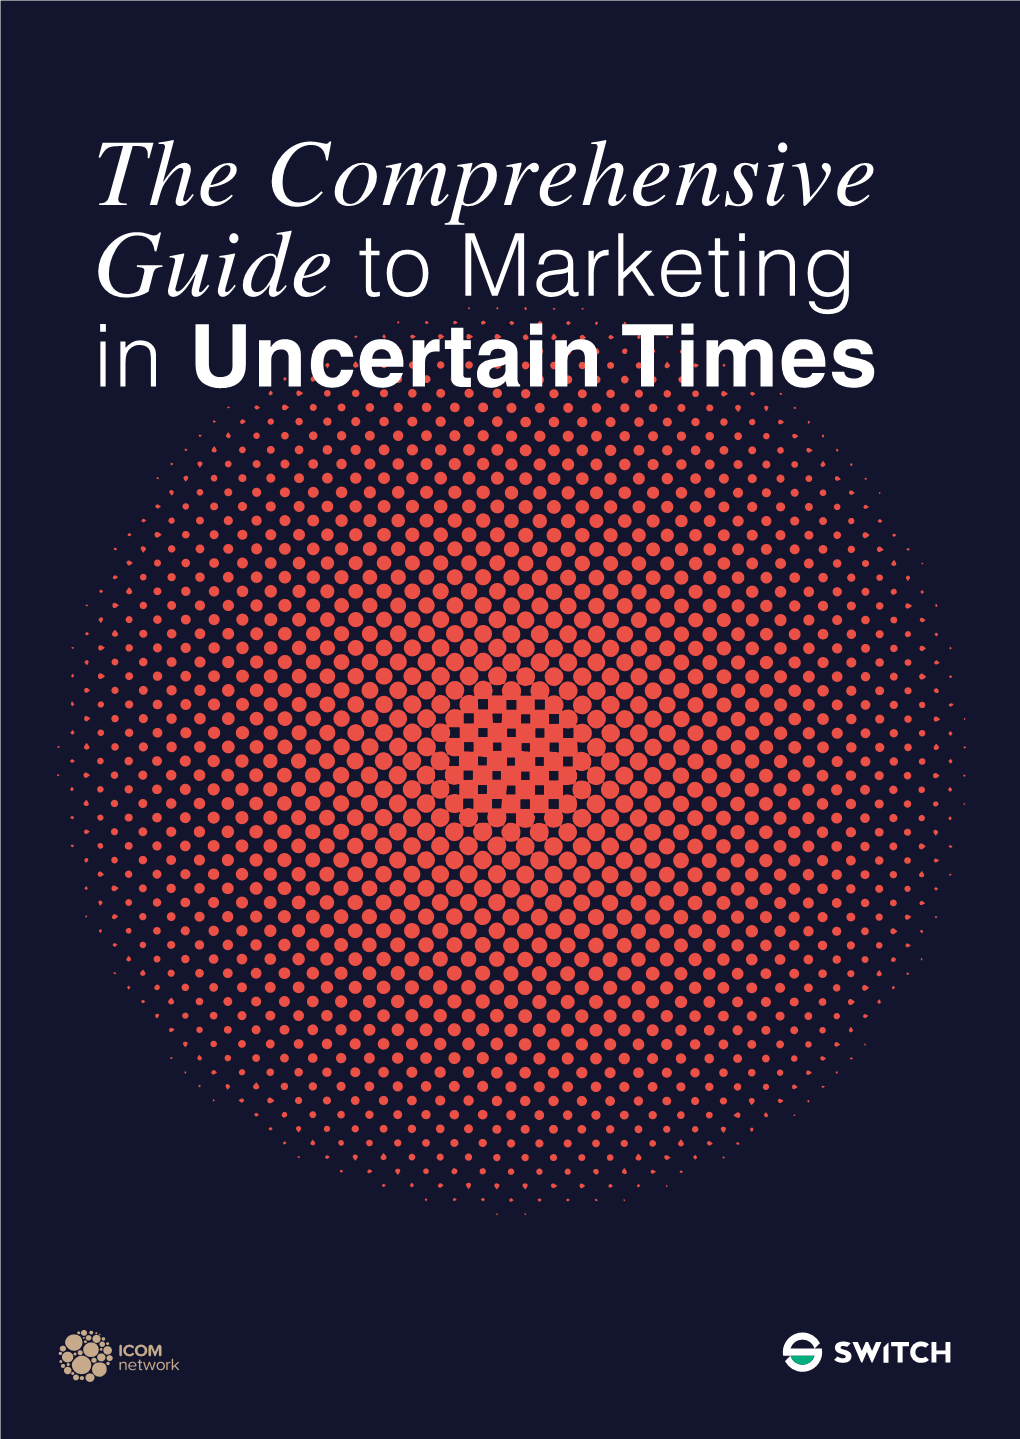 The Comprehensive Guide to Marketing in Uncertain Times the Comprehensive Guide to Marketing in Uncertain Times